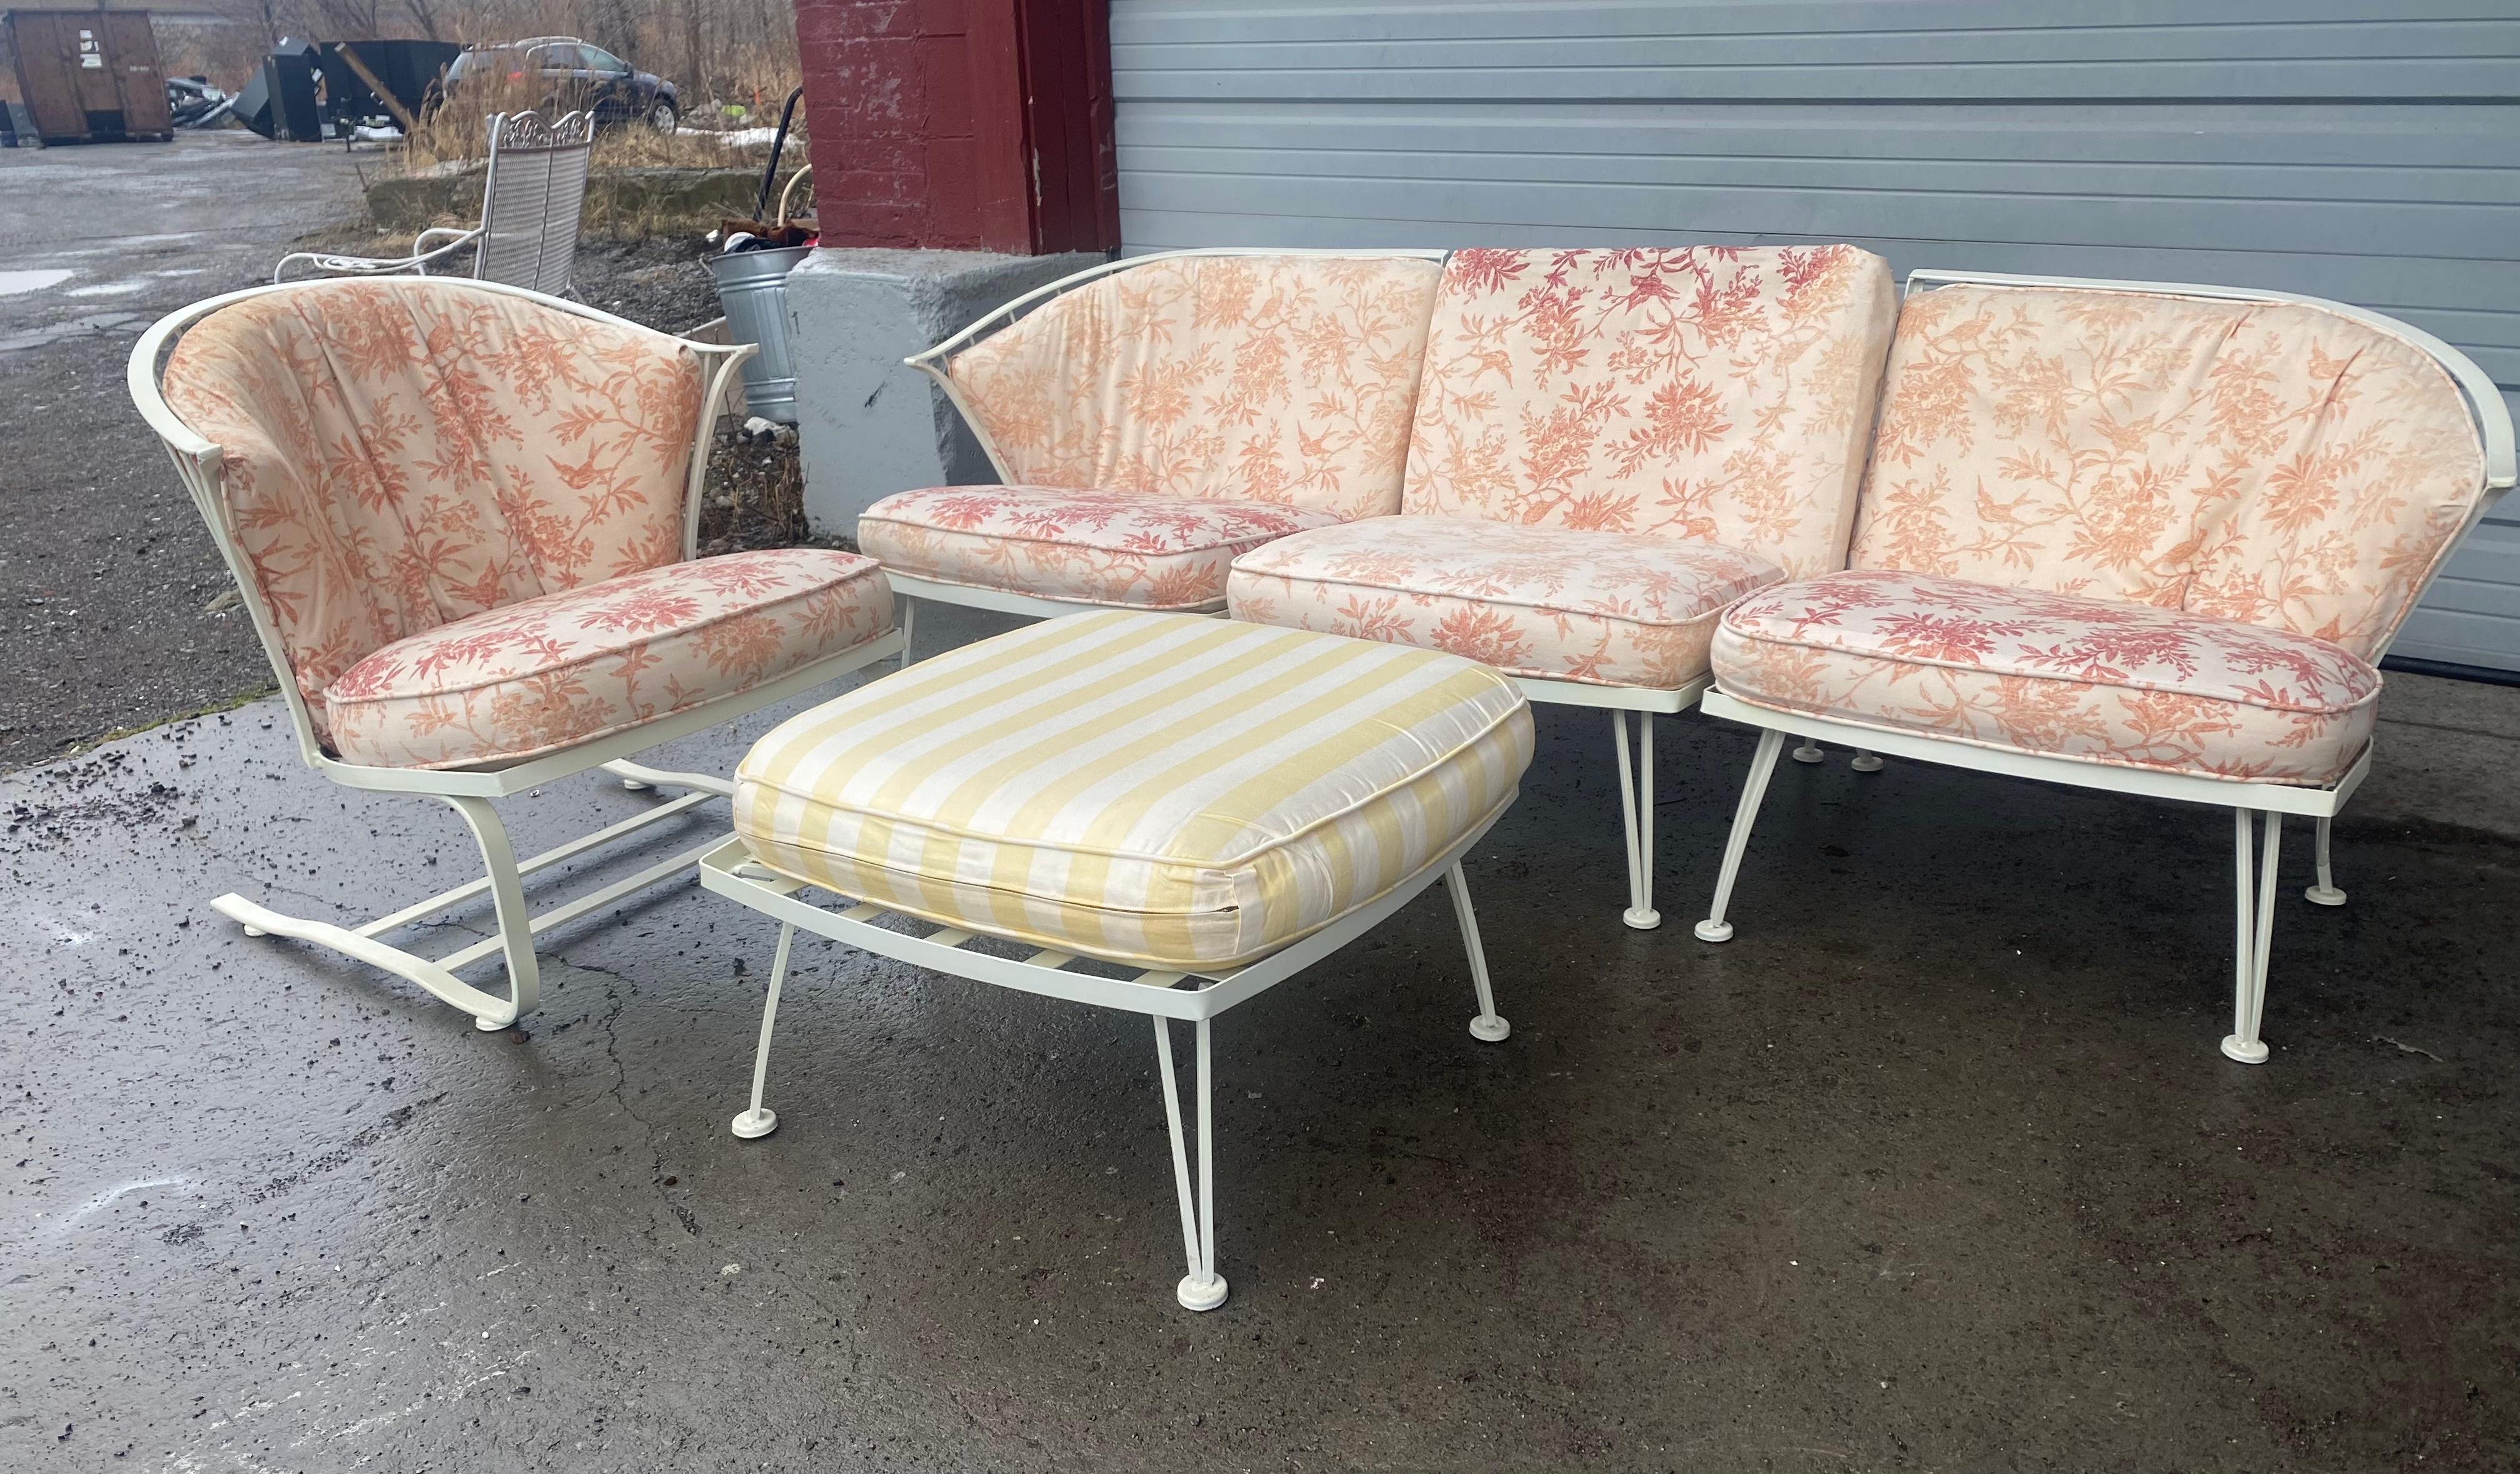 Set of 1950's Pinecrest Lounge Seating by Woodard, , rare springer chair & ottoman 1